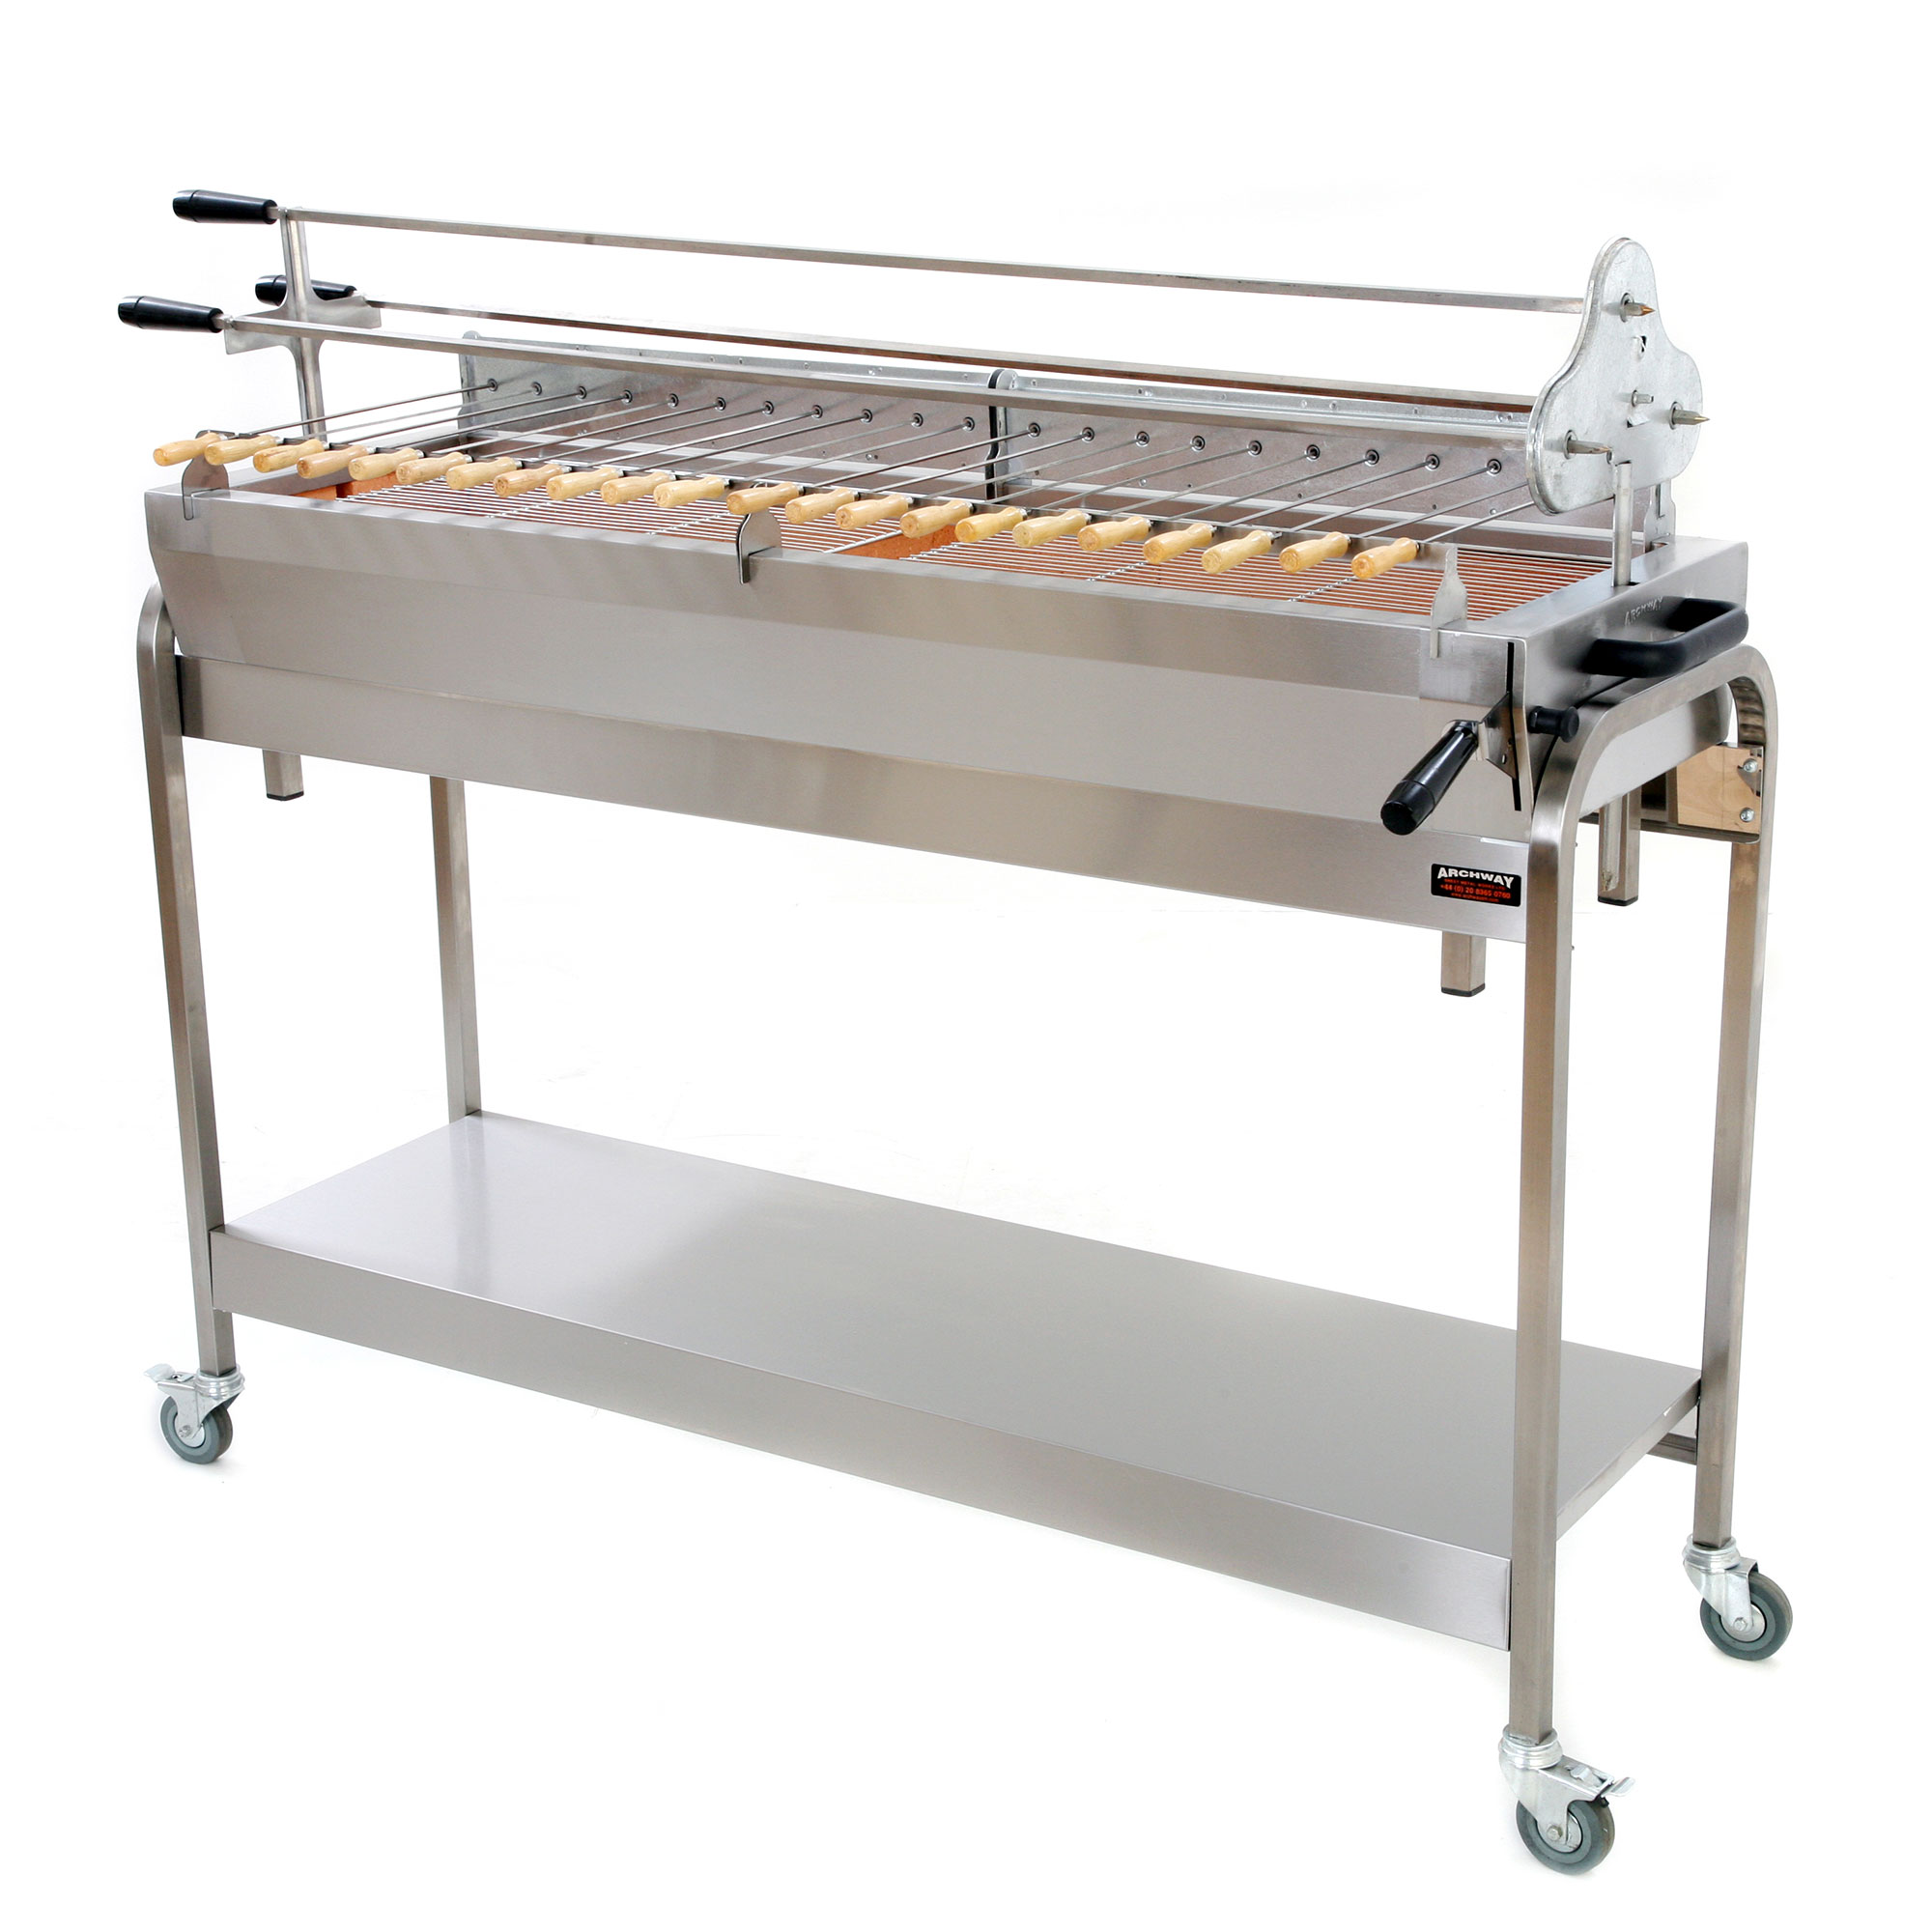 Archway Barbecue Deluxe XL